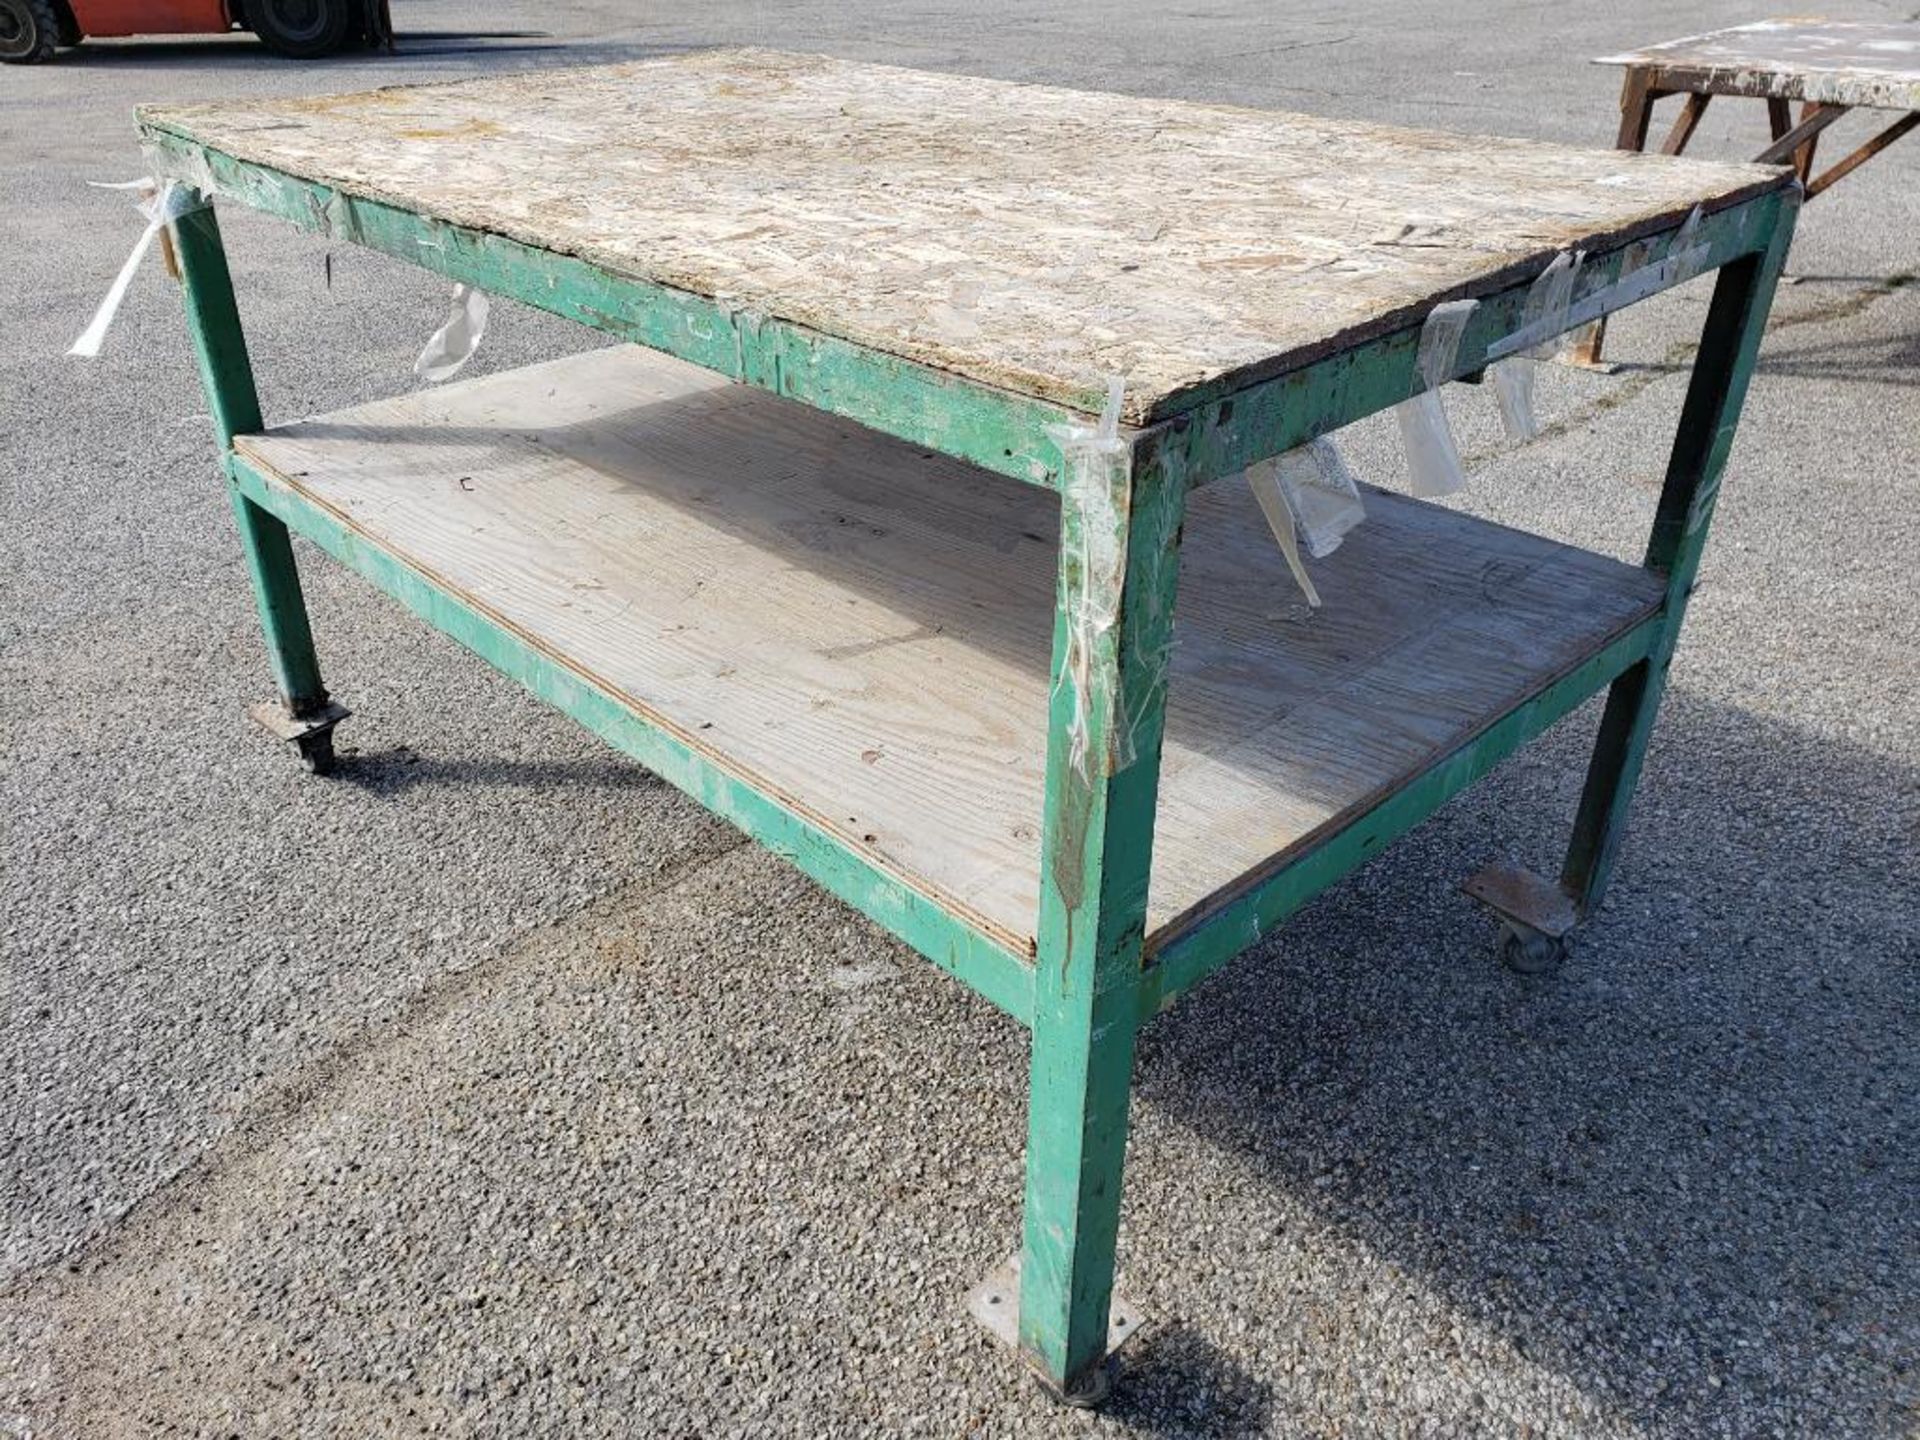 Heavy duty steel and wood table. 60in x 36in x 36in tall. - Image 2 of 6